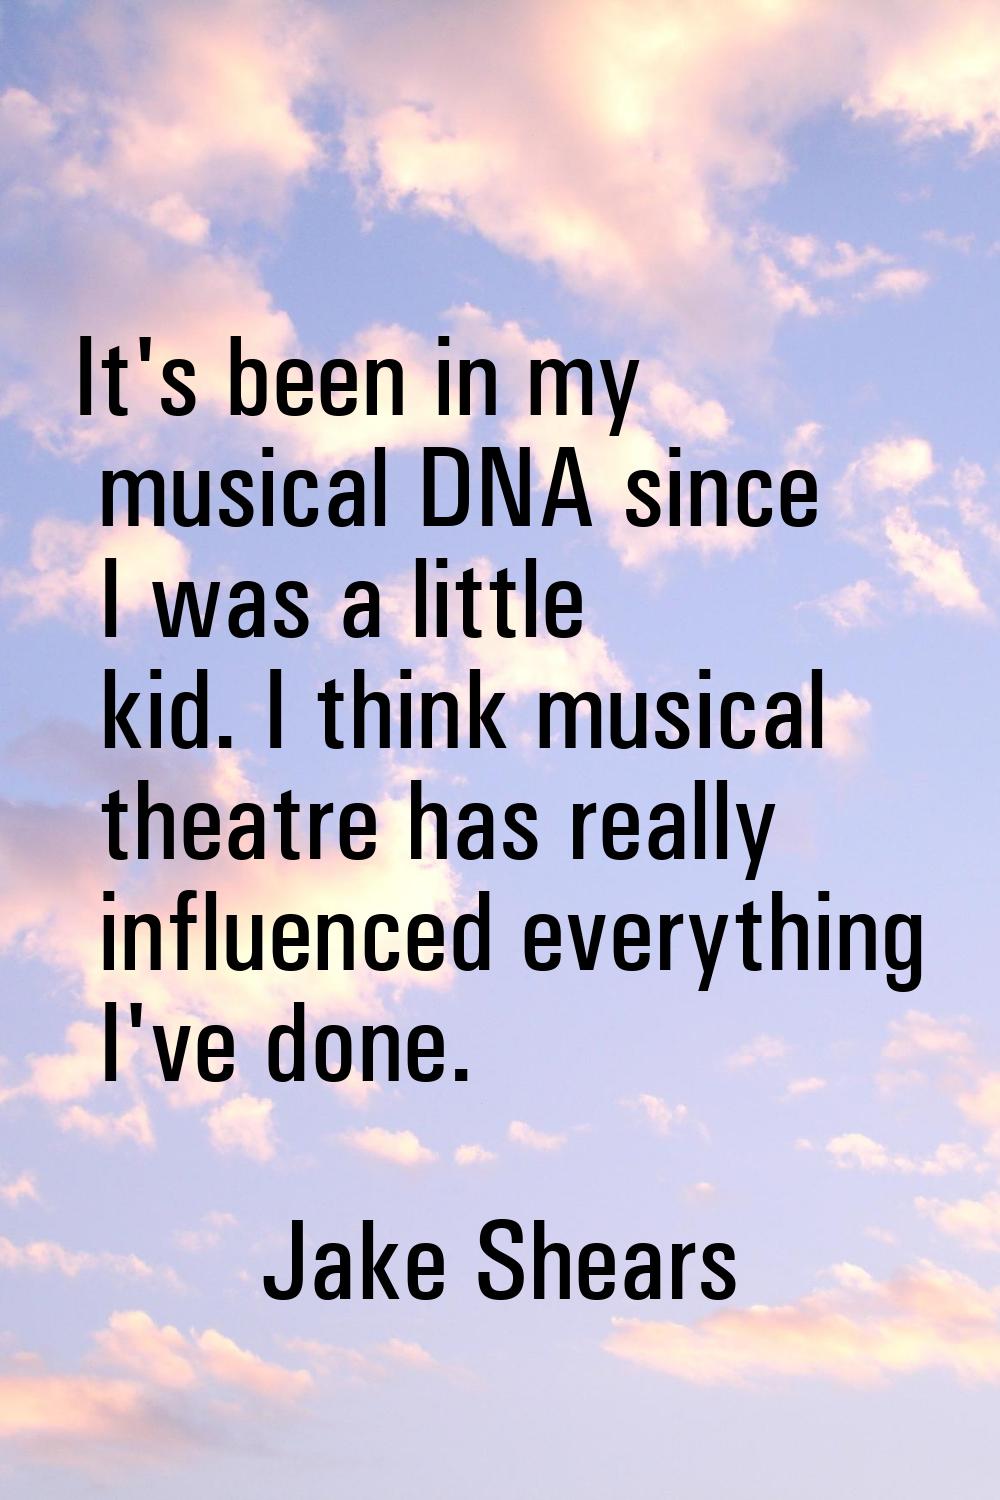 It's been in my musical DNA since I was a little kid. I think musical theatre has really influenced